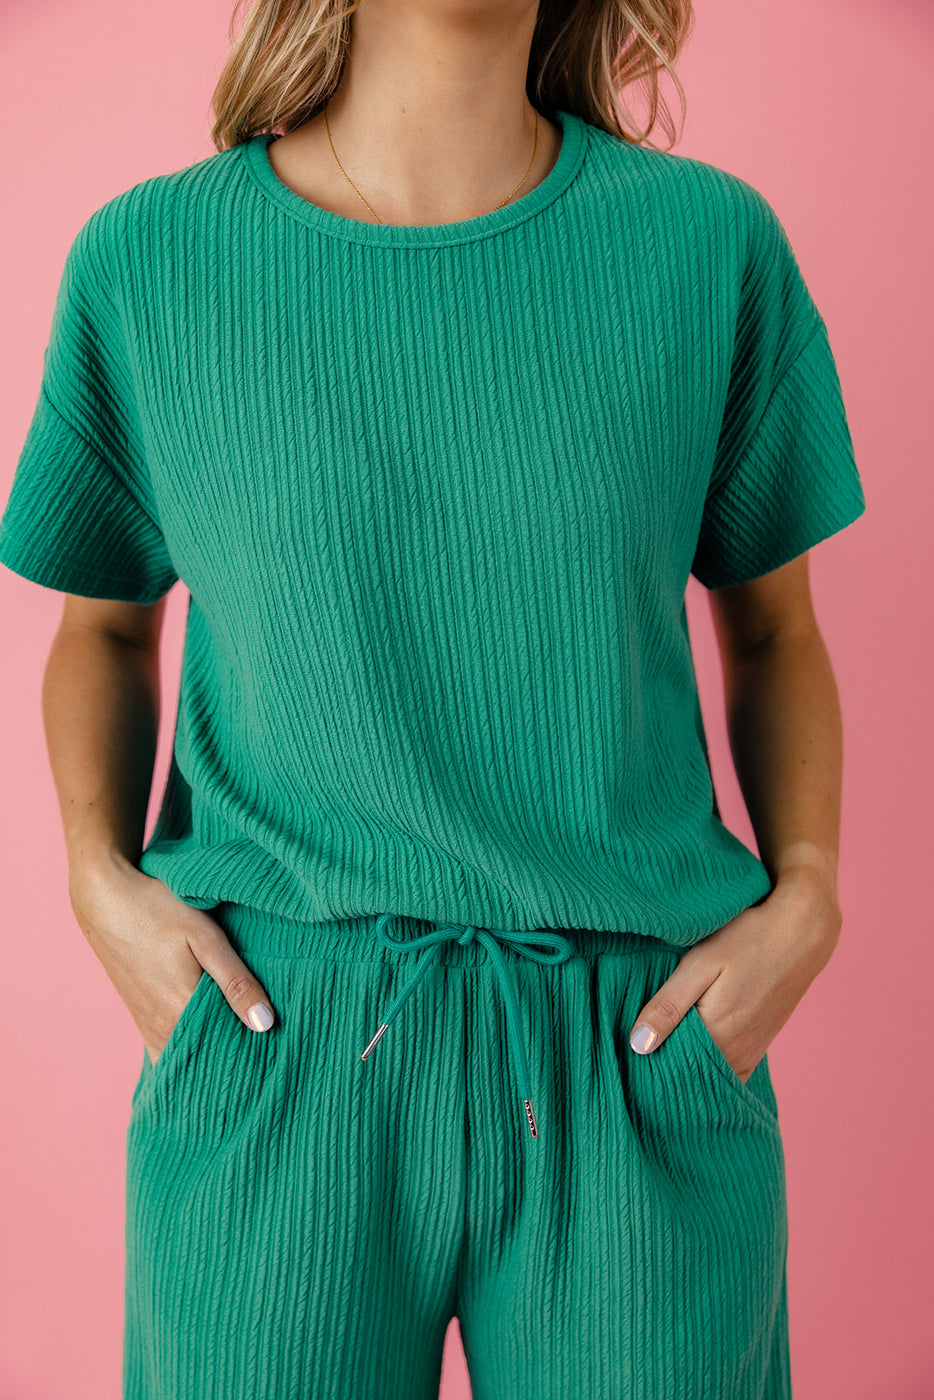 a person wearing a green outfit